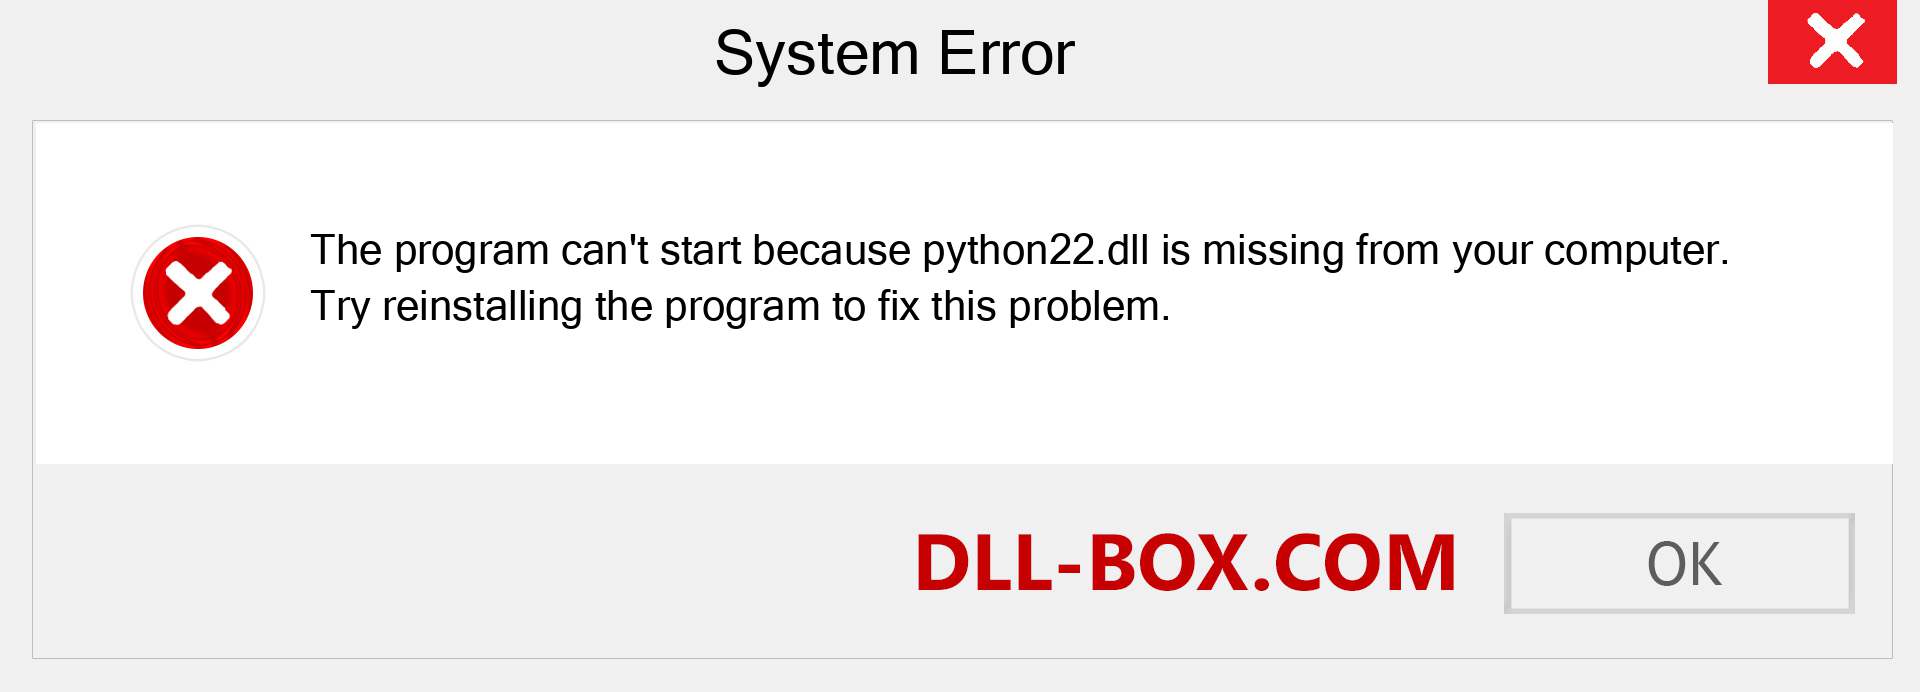  python22.dll file is missing?. Download for Windows 7, 8, 10 - Fix  python22 dll Missing Error on Windows, photos, images